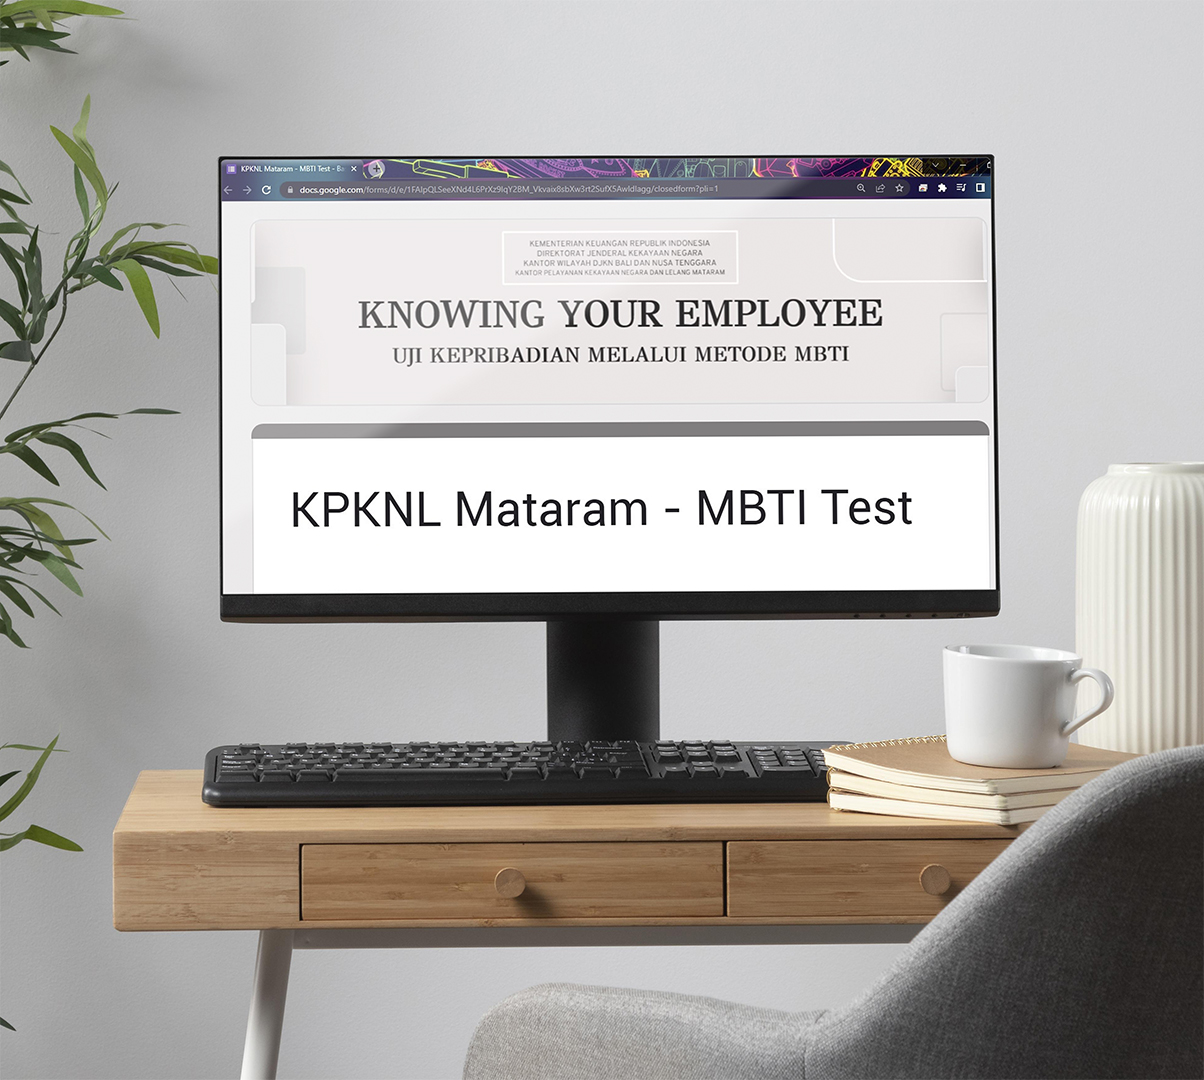 MBTI Test dalam Knowing Your Employee 